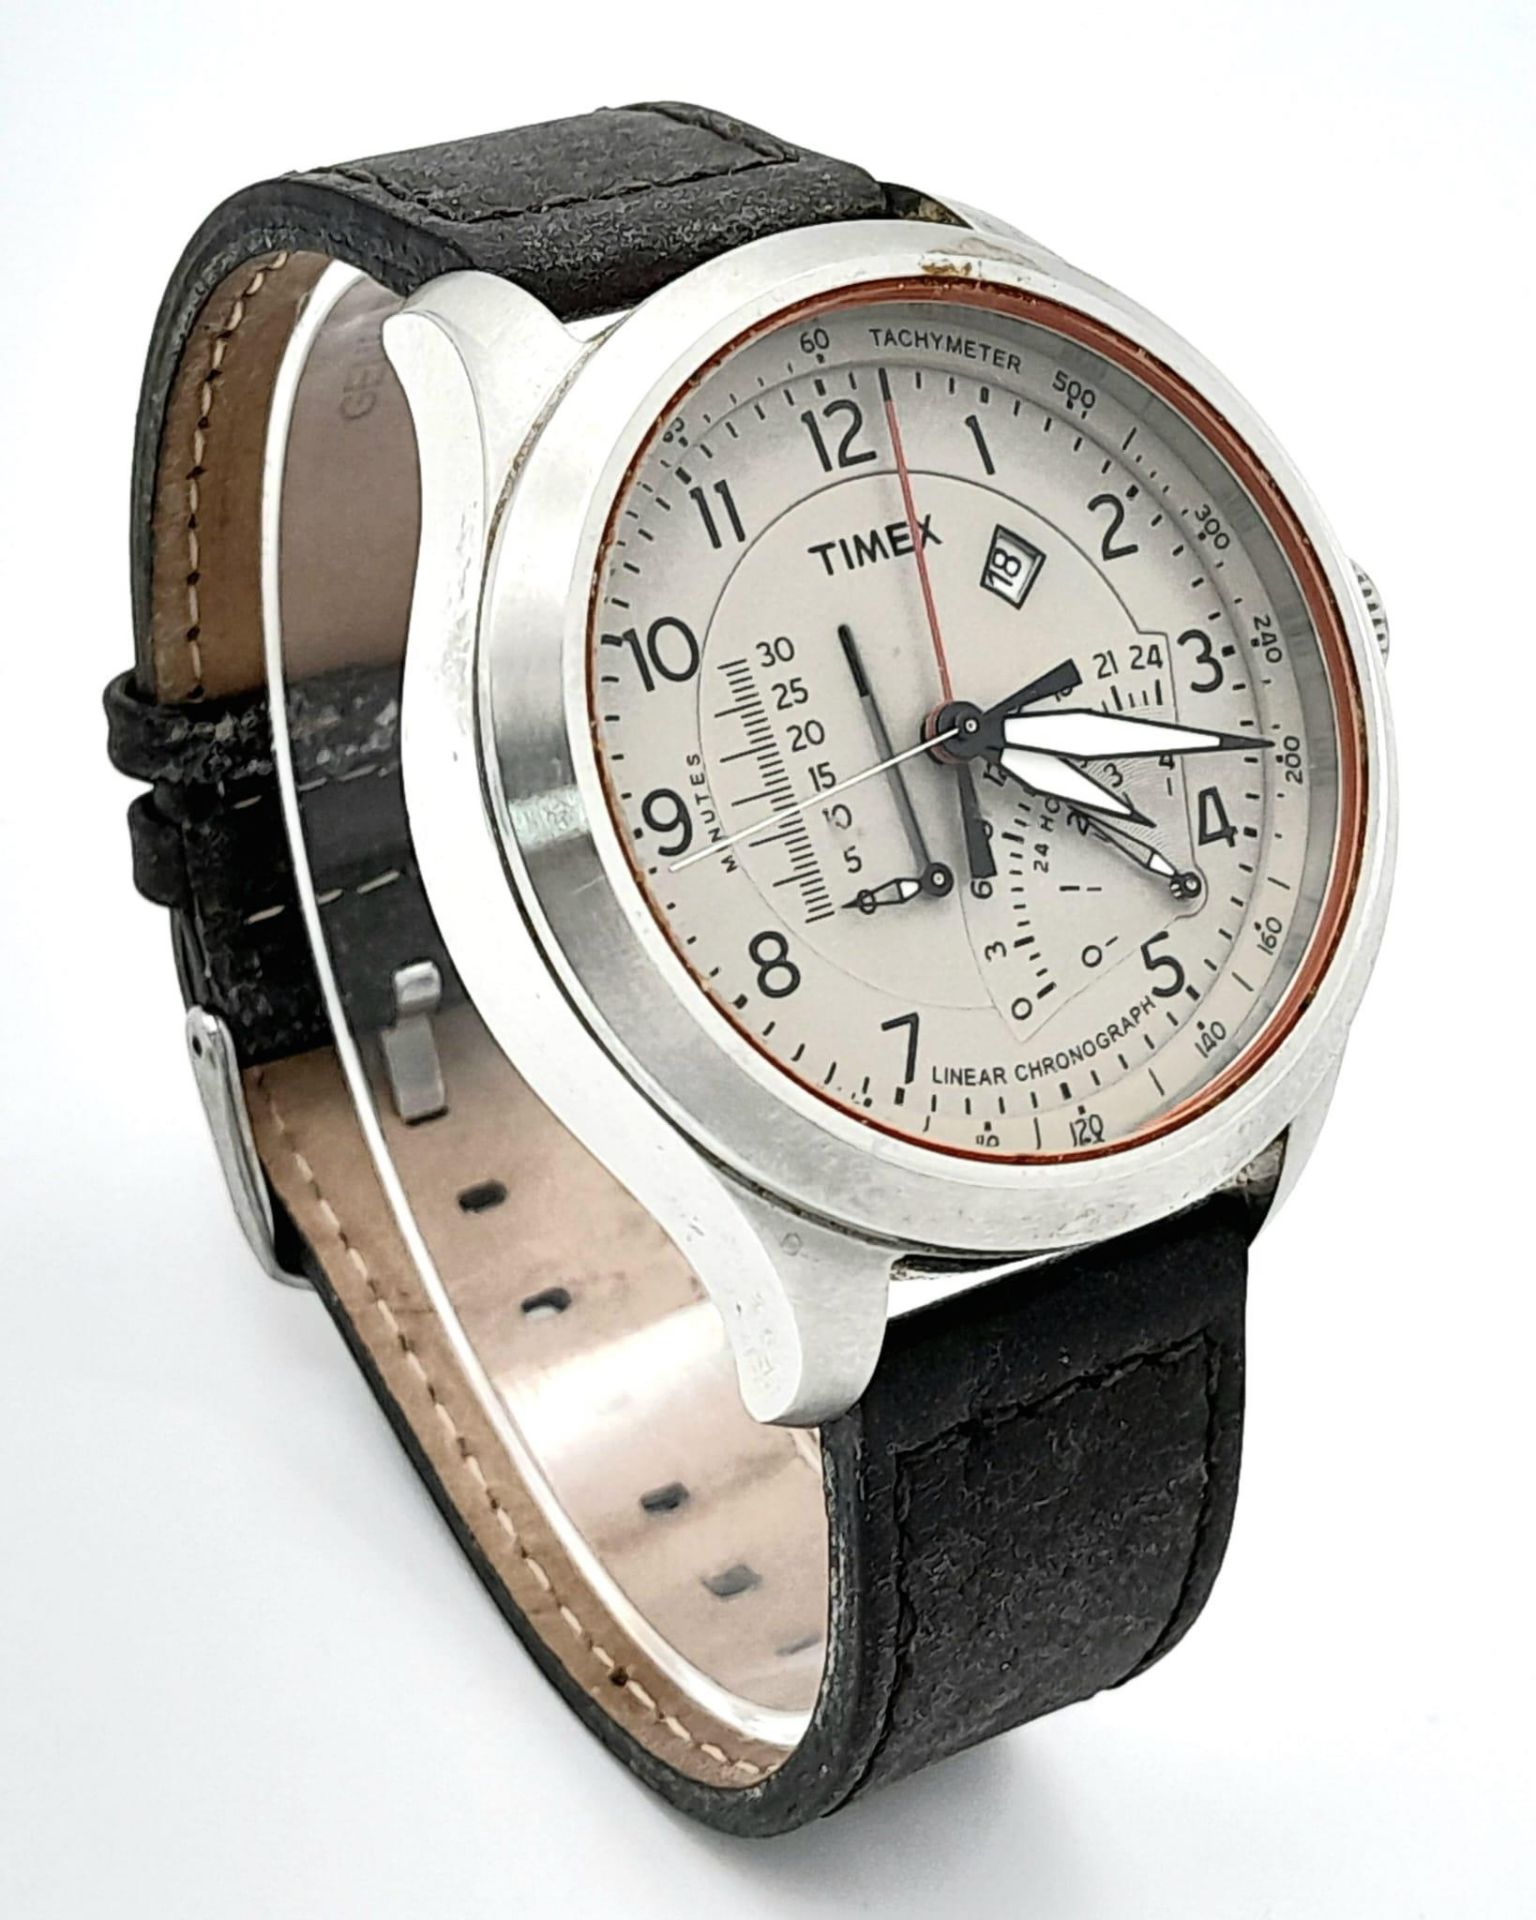 A Timex Intelligent Chronograph Quartz Gents Watch. Brown leather strap. Stainless steel case - - Image 3 of 6